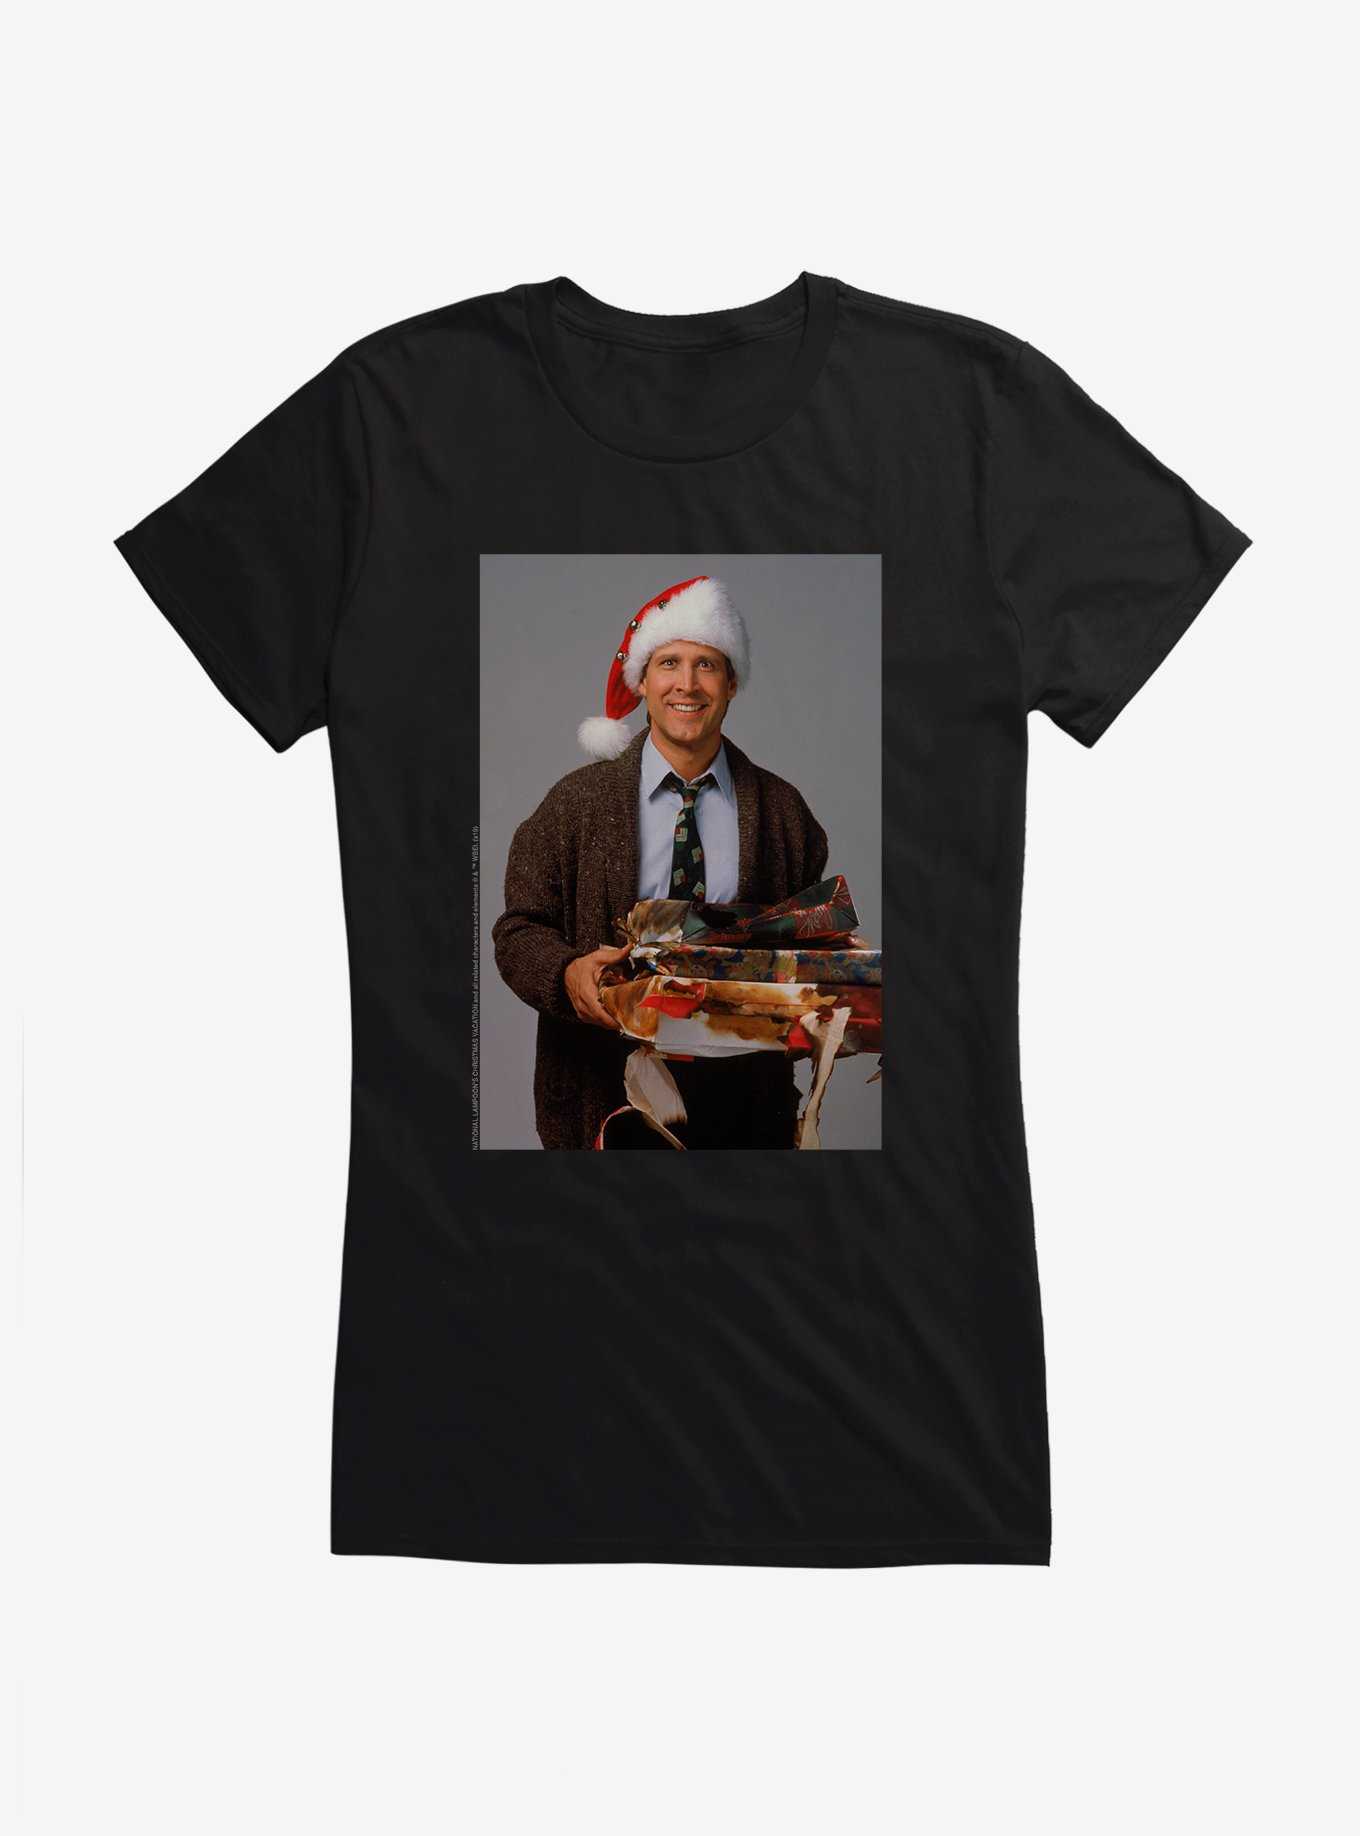 National Lampoon's Christmas Vacation Unwrap On Arrival Girl's T-Shirt, , hi-res